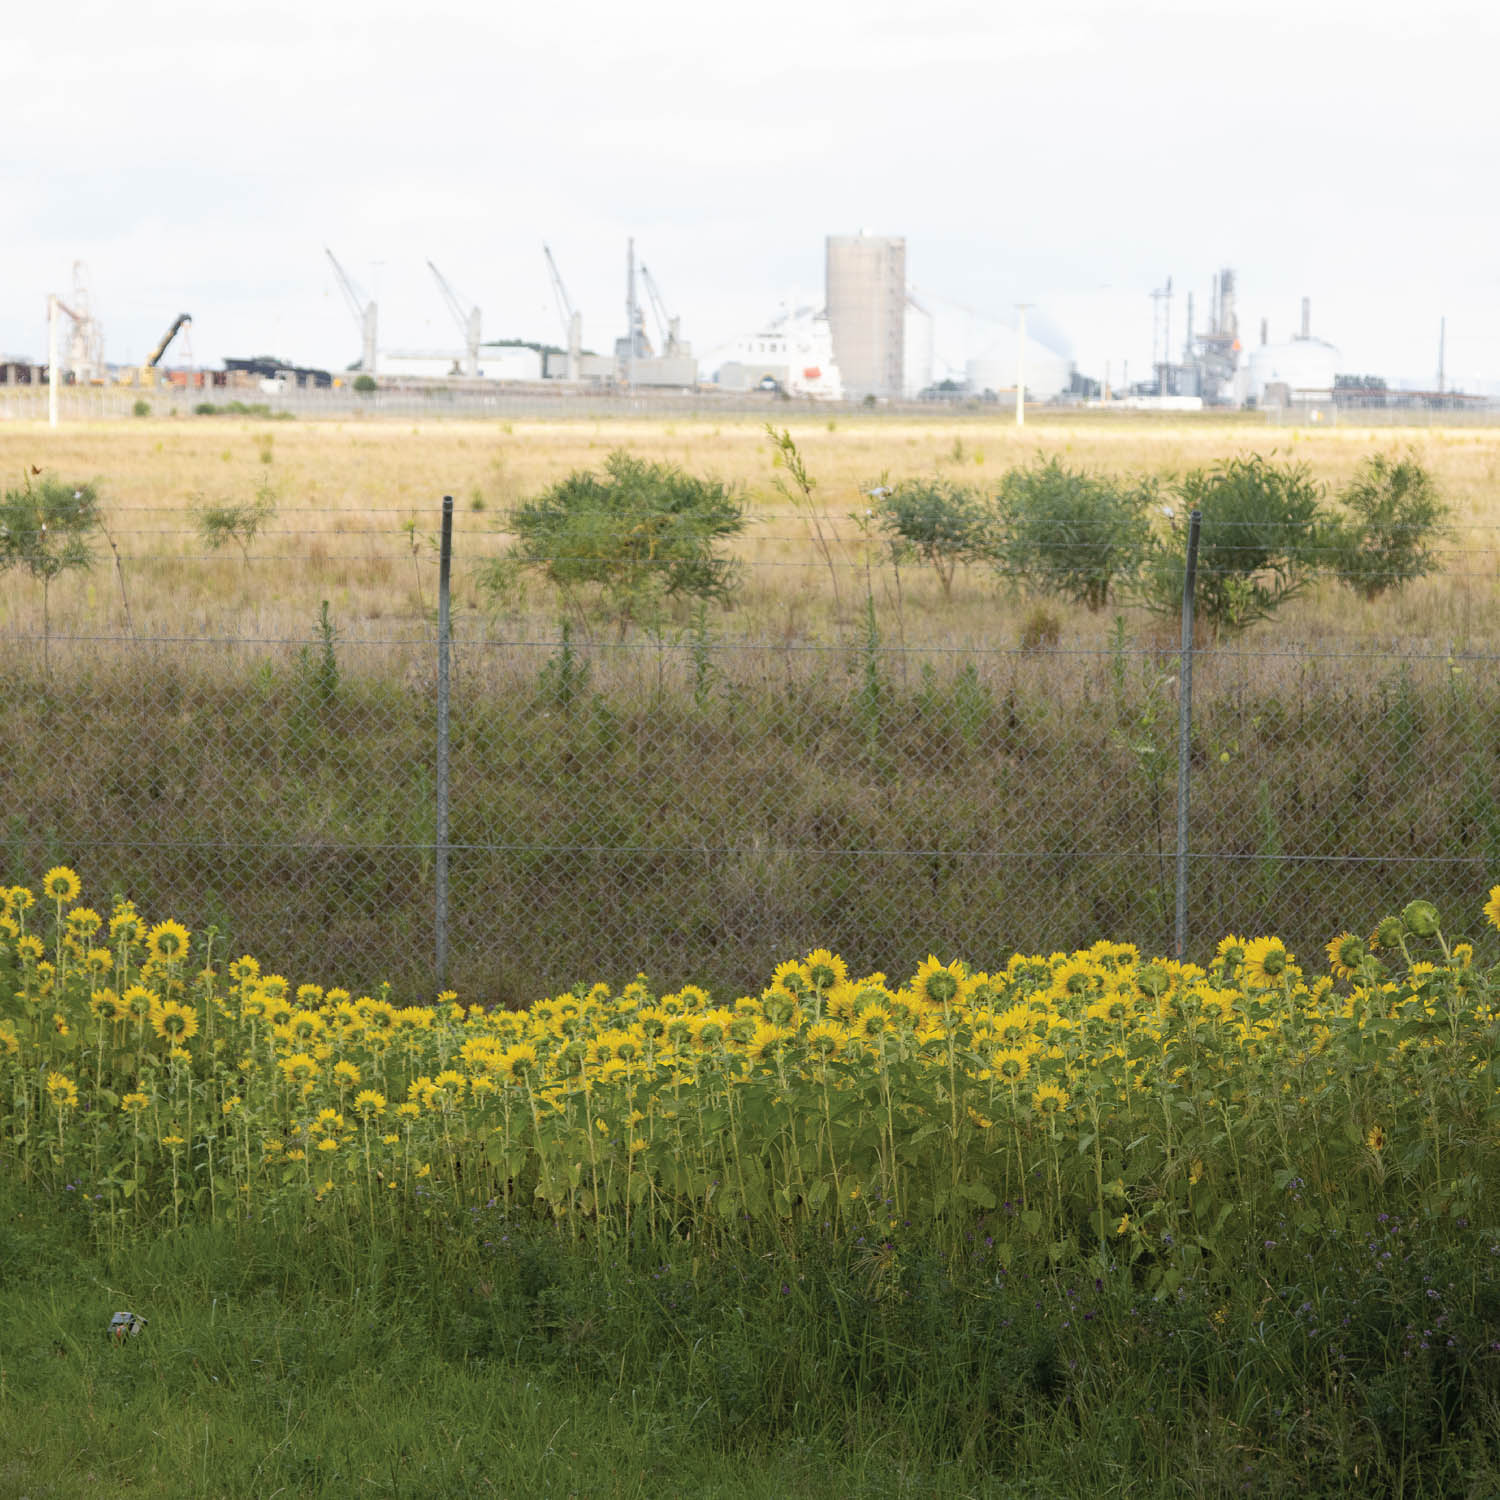 yellow flowers in the foreground with industrial background visible behind barbed wire fence^empty:{ds__assetid^as_asset:asset_name}